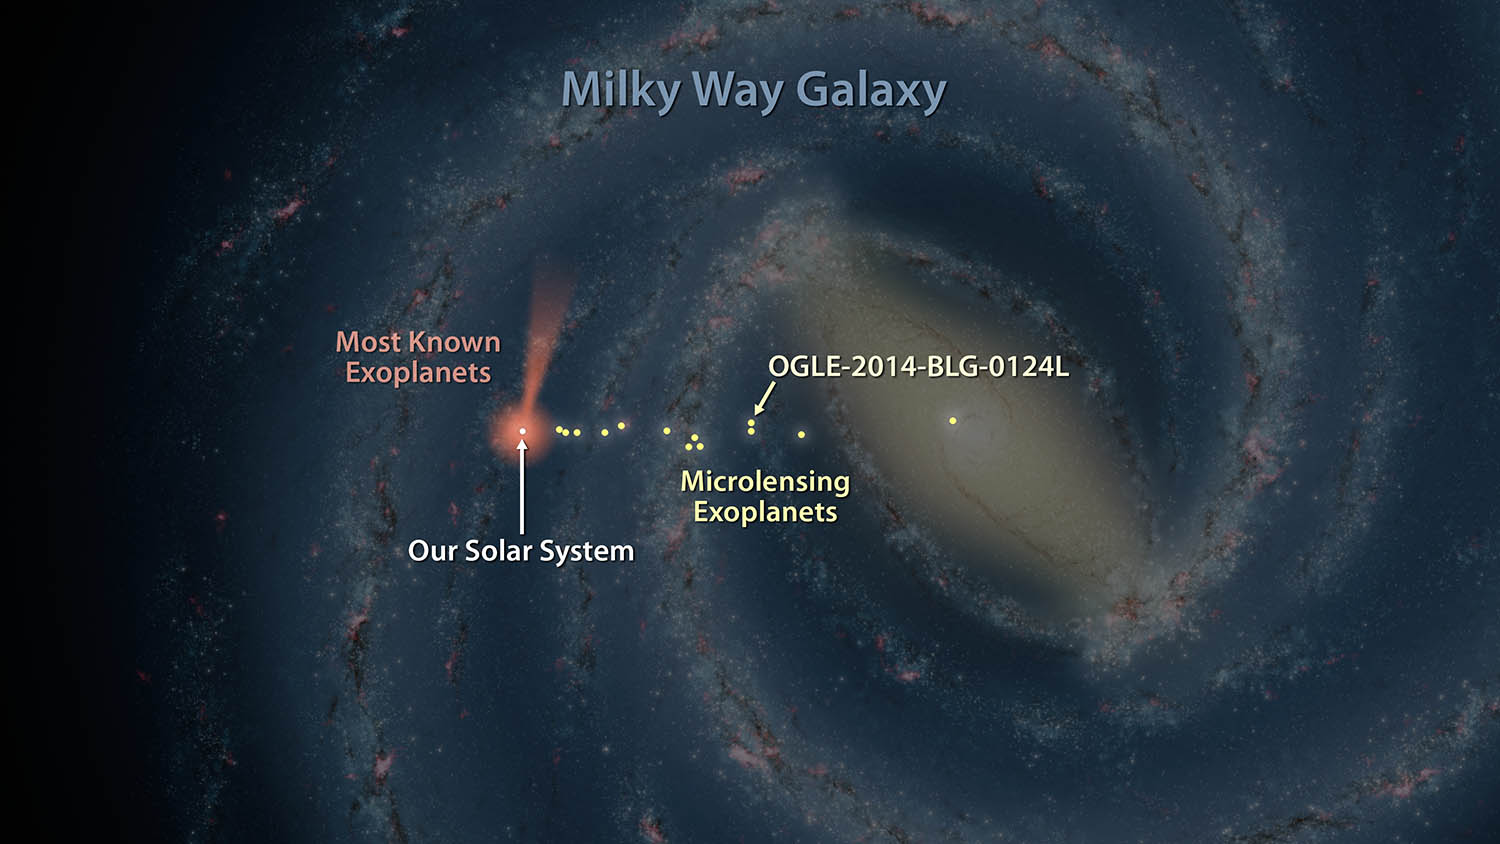 Utilising NASA's Spitzer Space Telescope, astronomers have discovered a distant exoplanet located 13,000 light-years away, through gravitational microlensing. The red cone in the map above our Solar System, depicts the extend in the galaxy of the thousands of known exoplanets that have been discovered by NASA's Kepler space telescope, while the red circle represents the extend of all the exoplanets that have been detected so far by ground-based telescopes. The white dots show the positions of exoplanets that have been discovered through the gravitational microlensing technique. Image Credit: NASA/JPL-Caltech